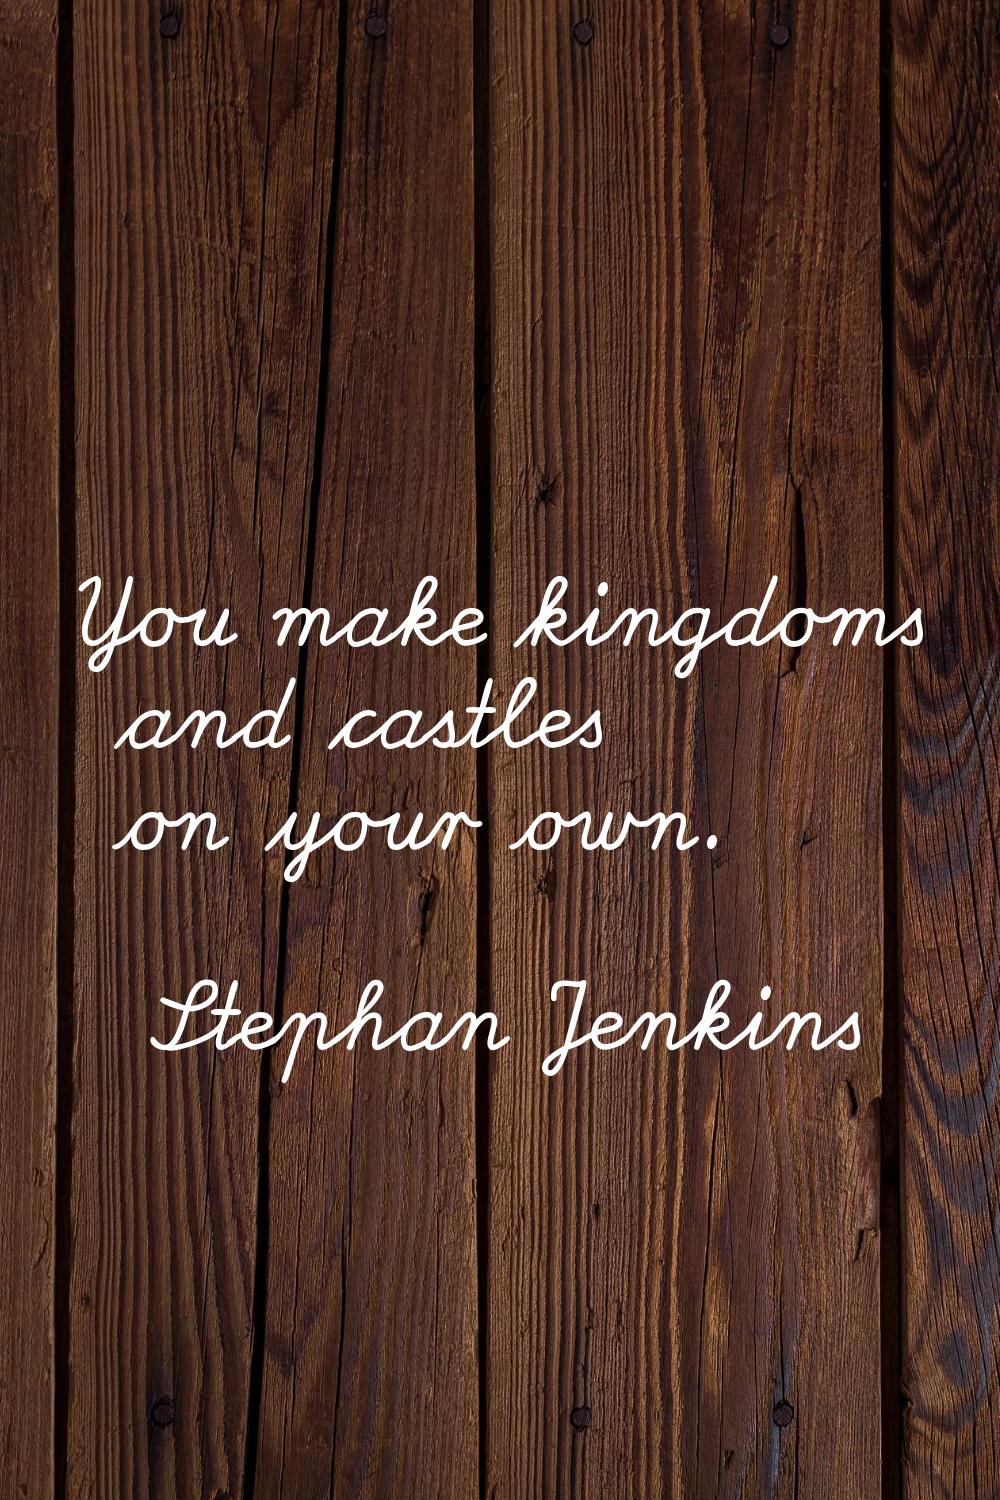 You make kingdoms and castles on your own.